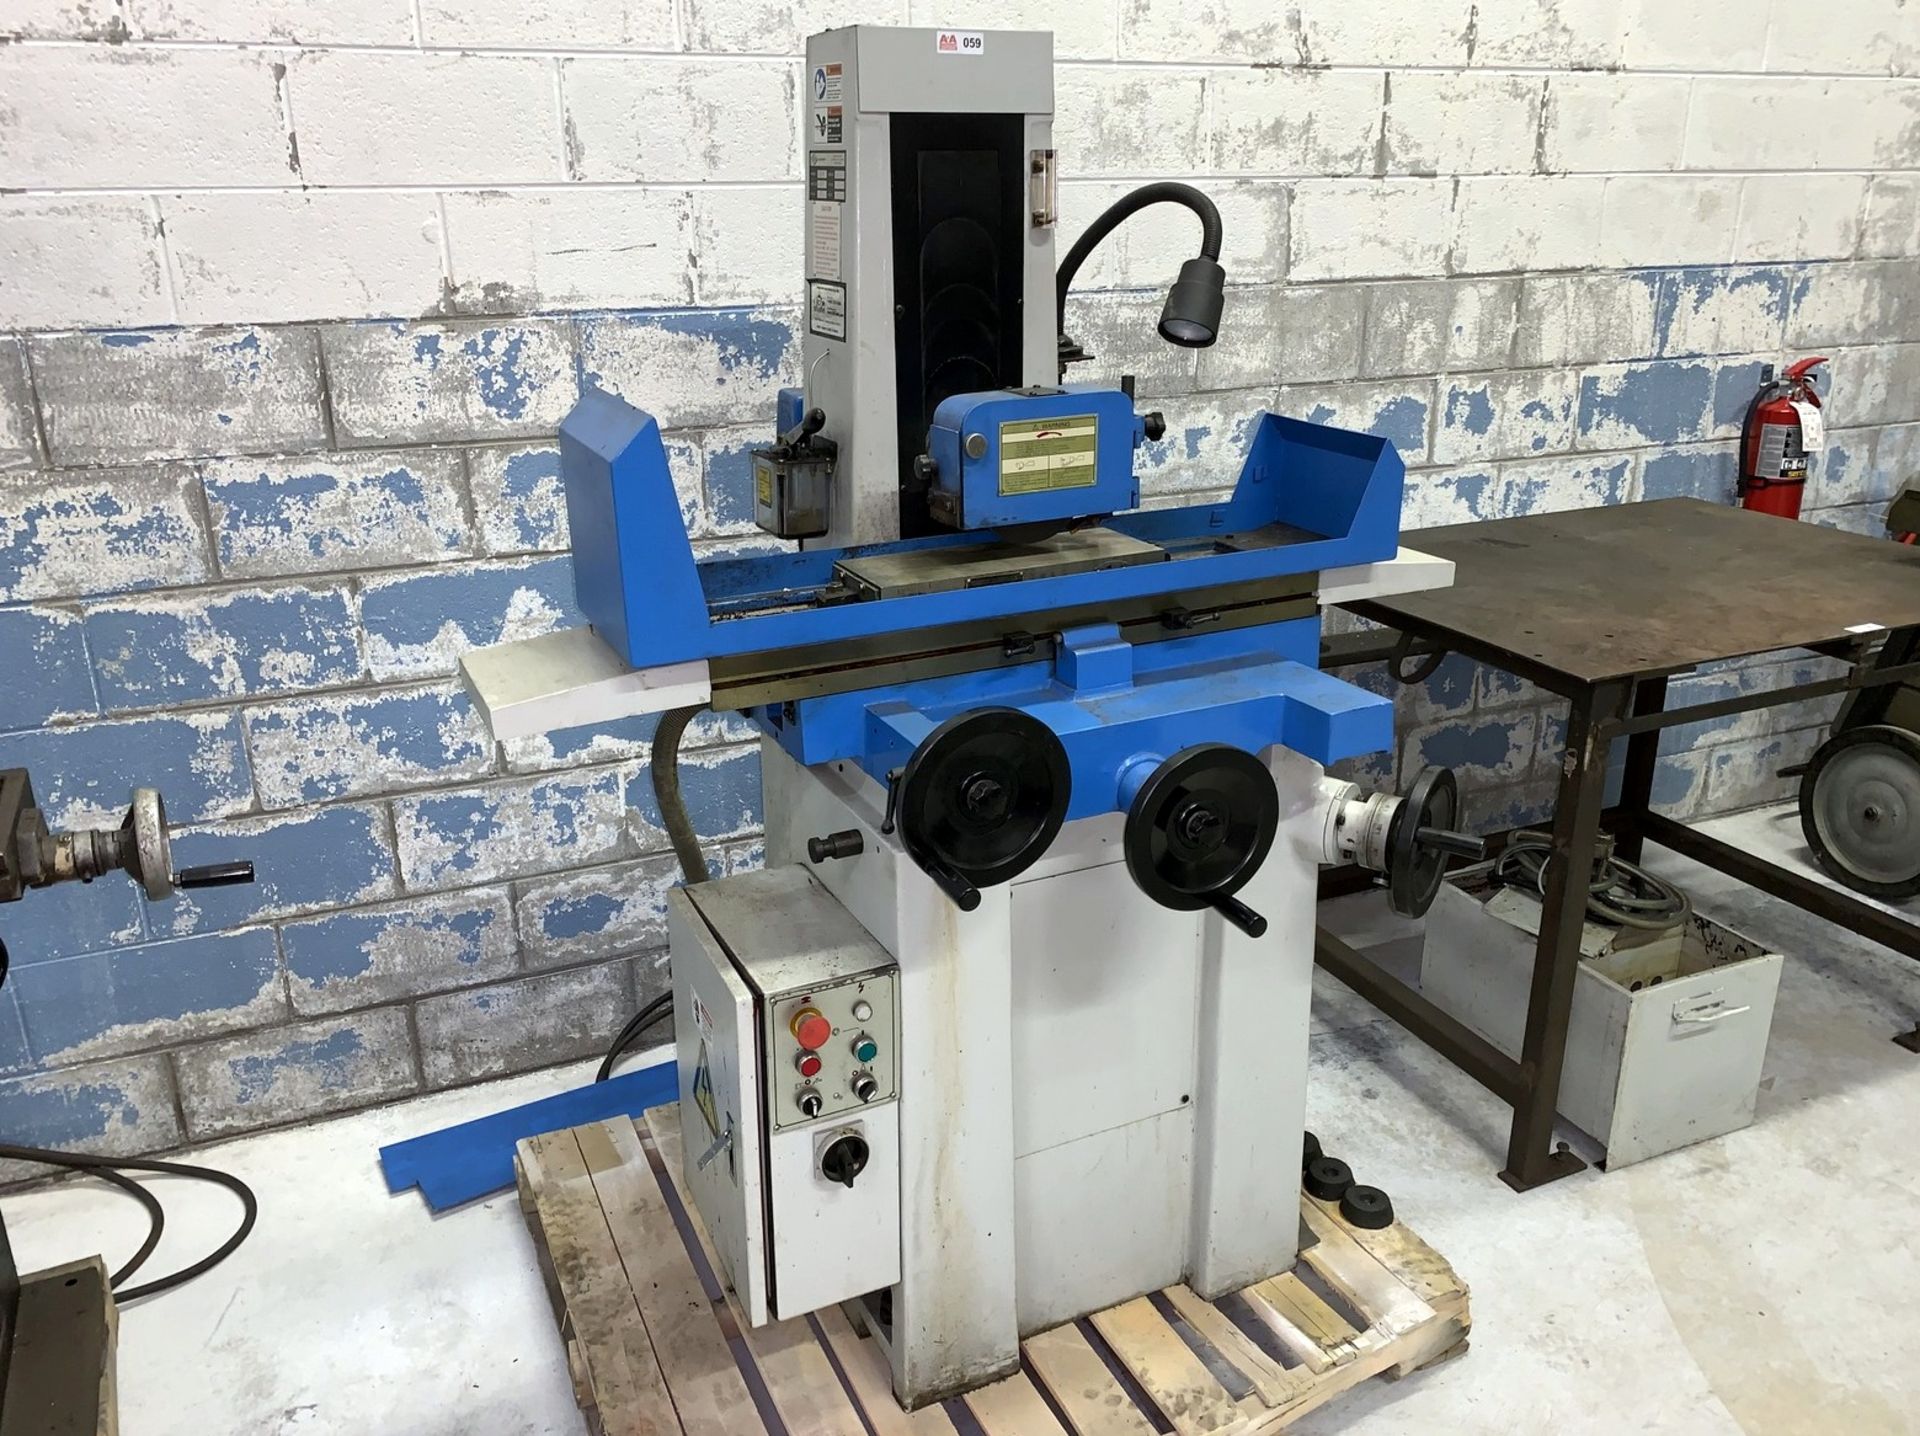 KBC Machinery Mdl. 618A Surface Grinder with 6" x 16" Magnetic Chuck, Hydraulic Tank (All Items MUST